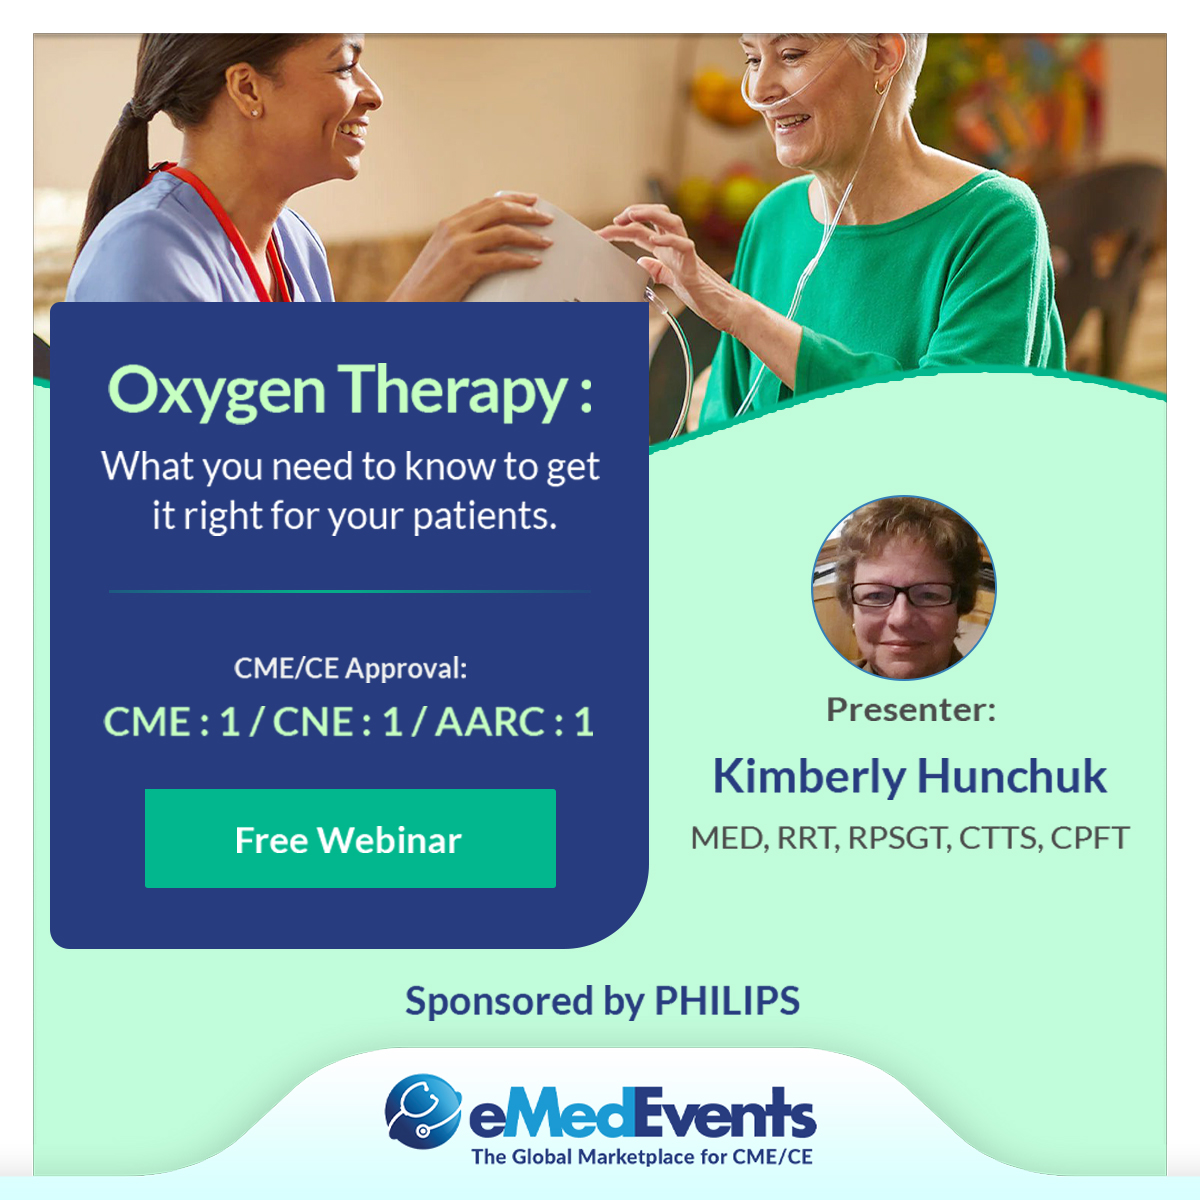 Oxygen Therapy: Expand your knowledge to get it right for your patients.
Checkout Free CE/CME from #Philips
bit.ly/3E5n6OI

#eMedEvents #oxygentherapy #patients #freewebinar #CME #CE #CNE #AARC #medicaleducation #Physicians #Nurses #Dentists #Pharmacists